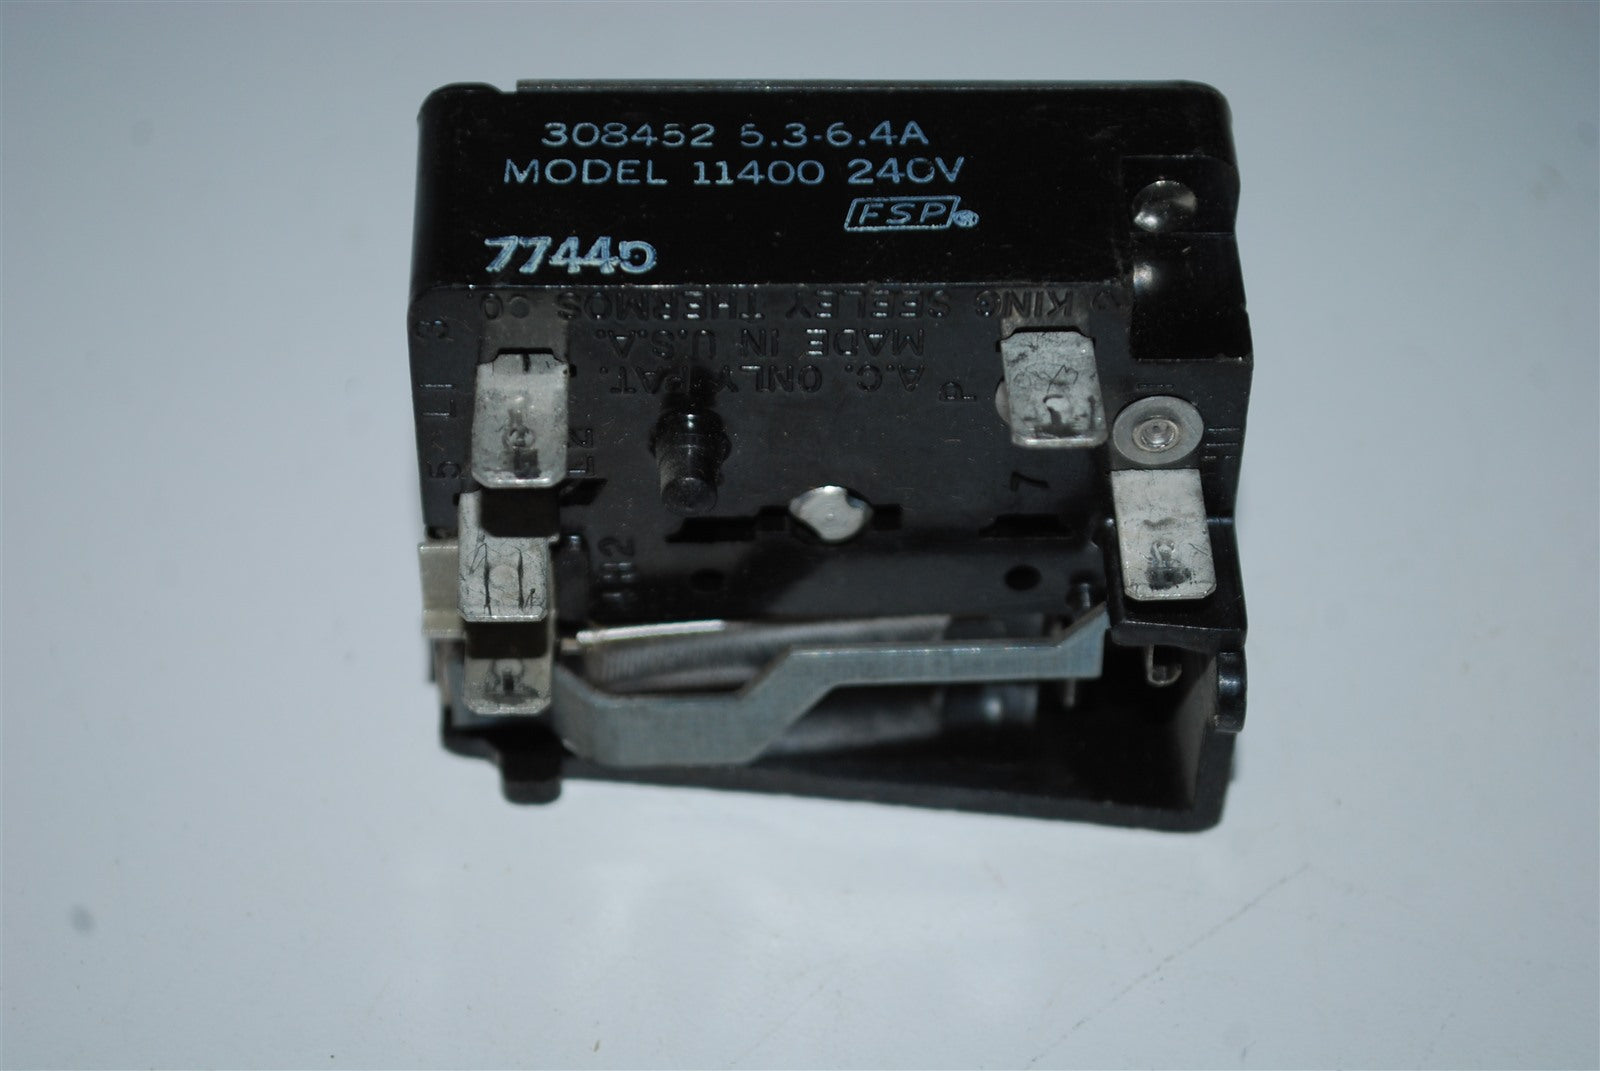 Whirlpool Range Burner Switch 308452 MOd 11400  Rated at 5.3-6.4A